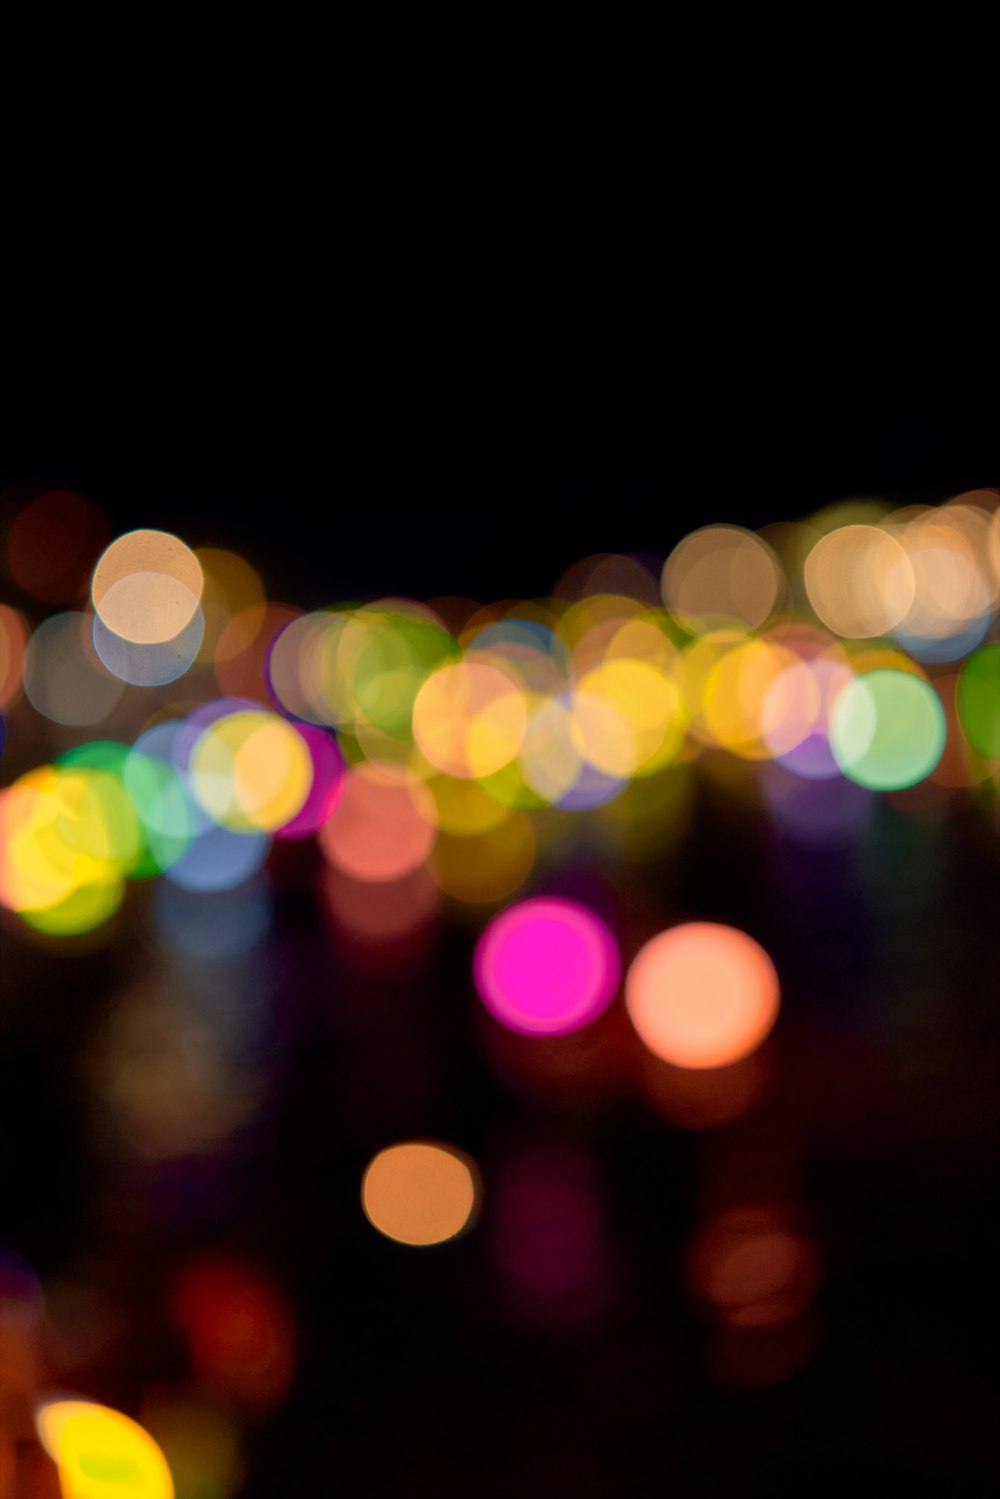 blurry close up of a group of lights